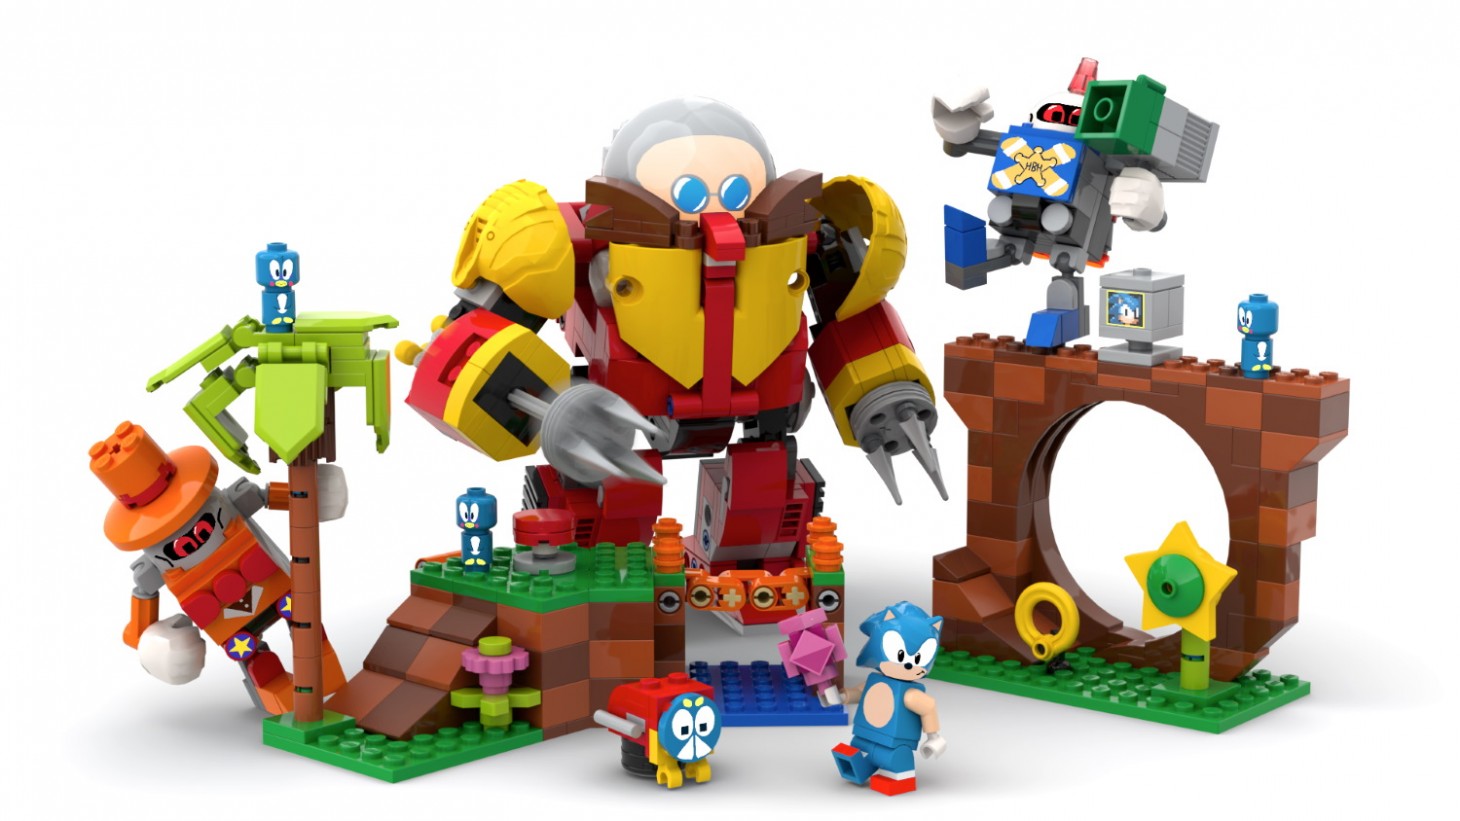 Another new Sonic Lego set features the iconic Death Egg robot